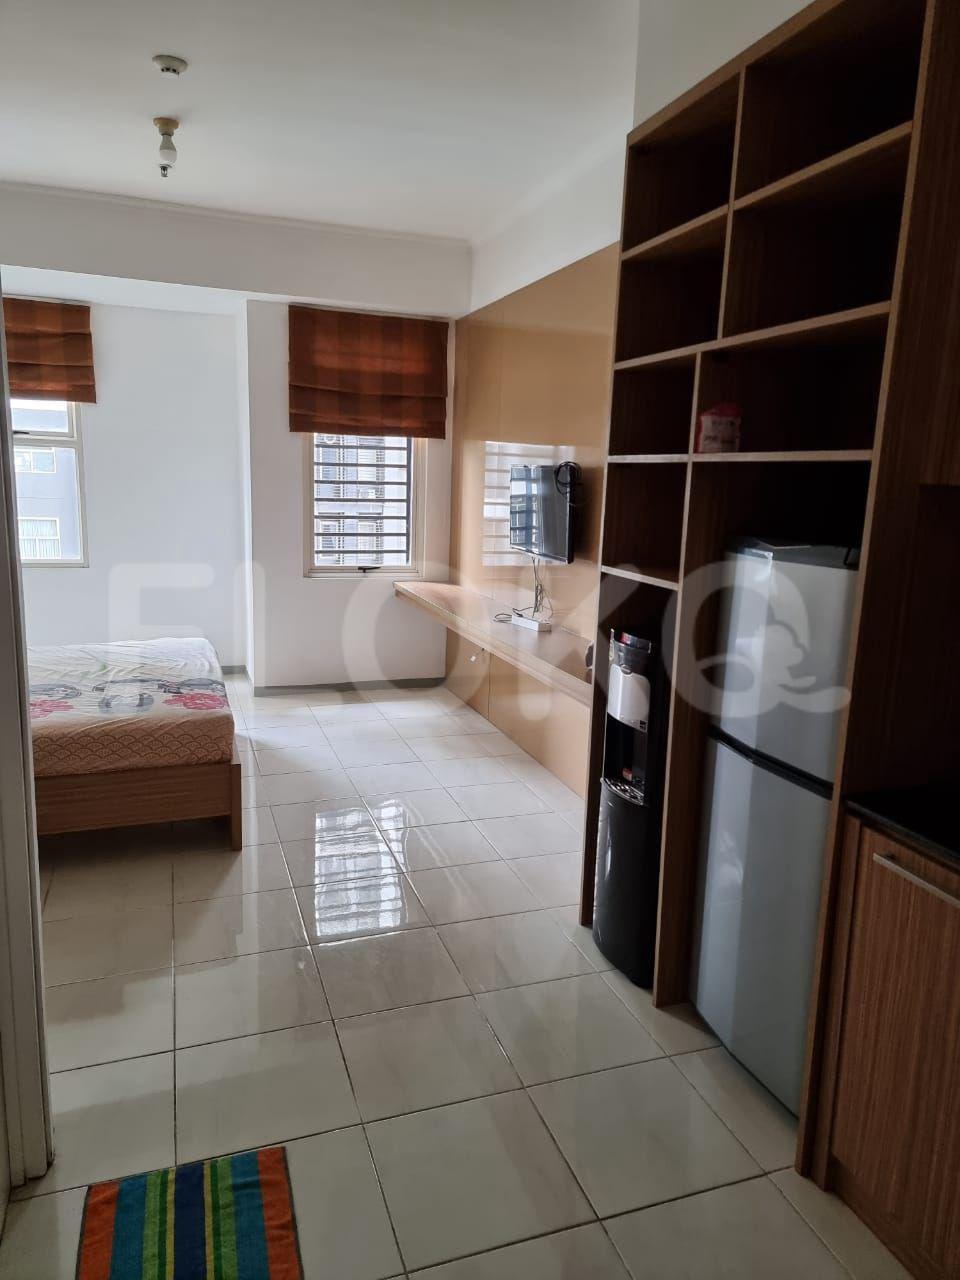 1 Bedroom on 5th Floor fal030 for Rent in Silkwood Residence